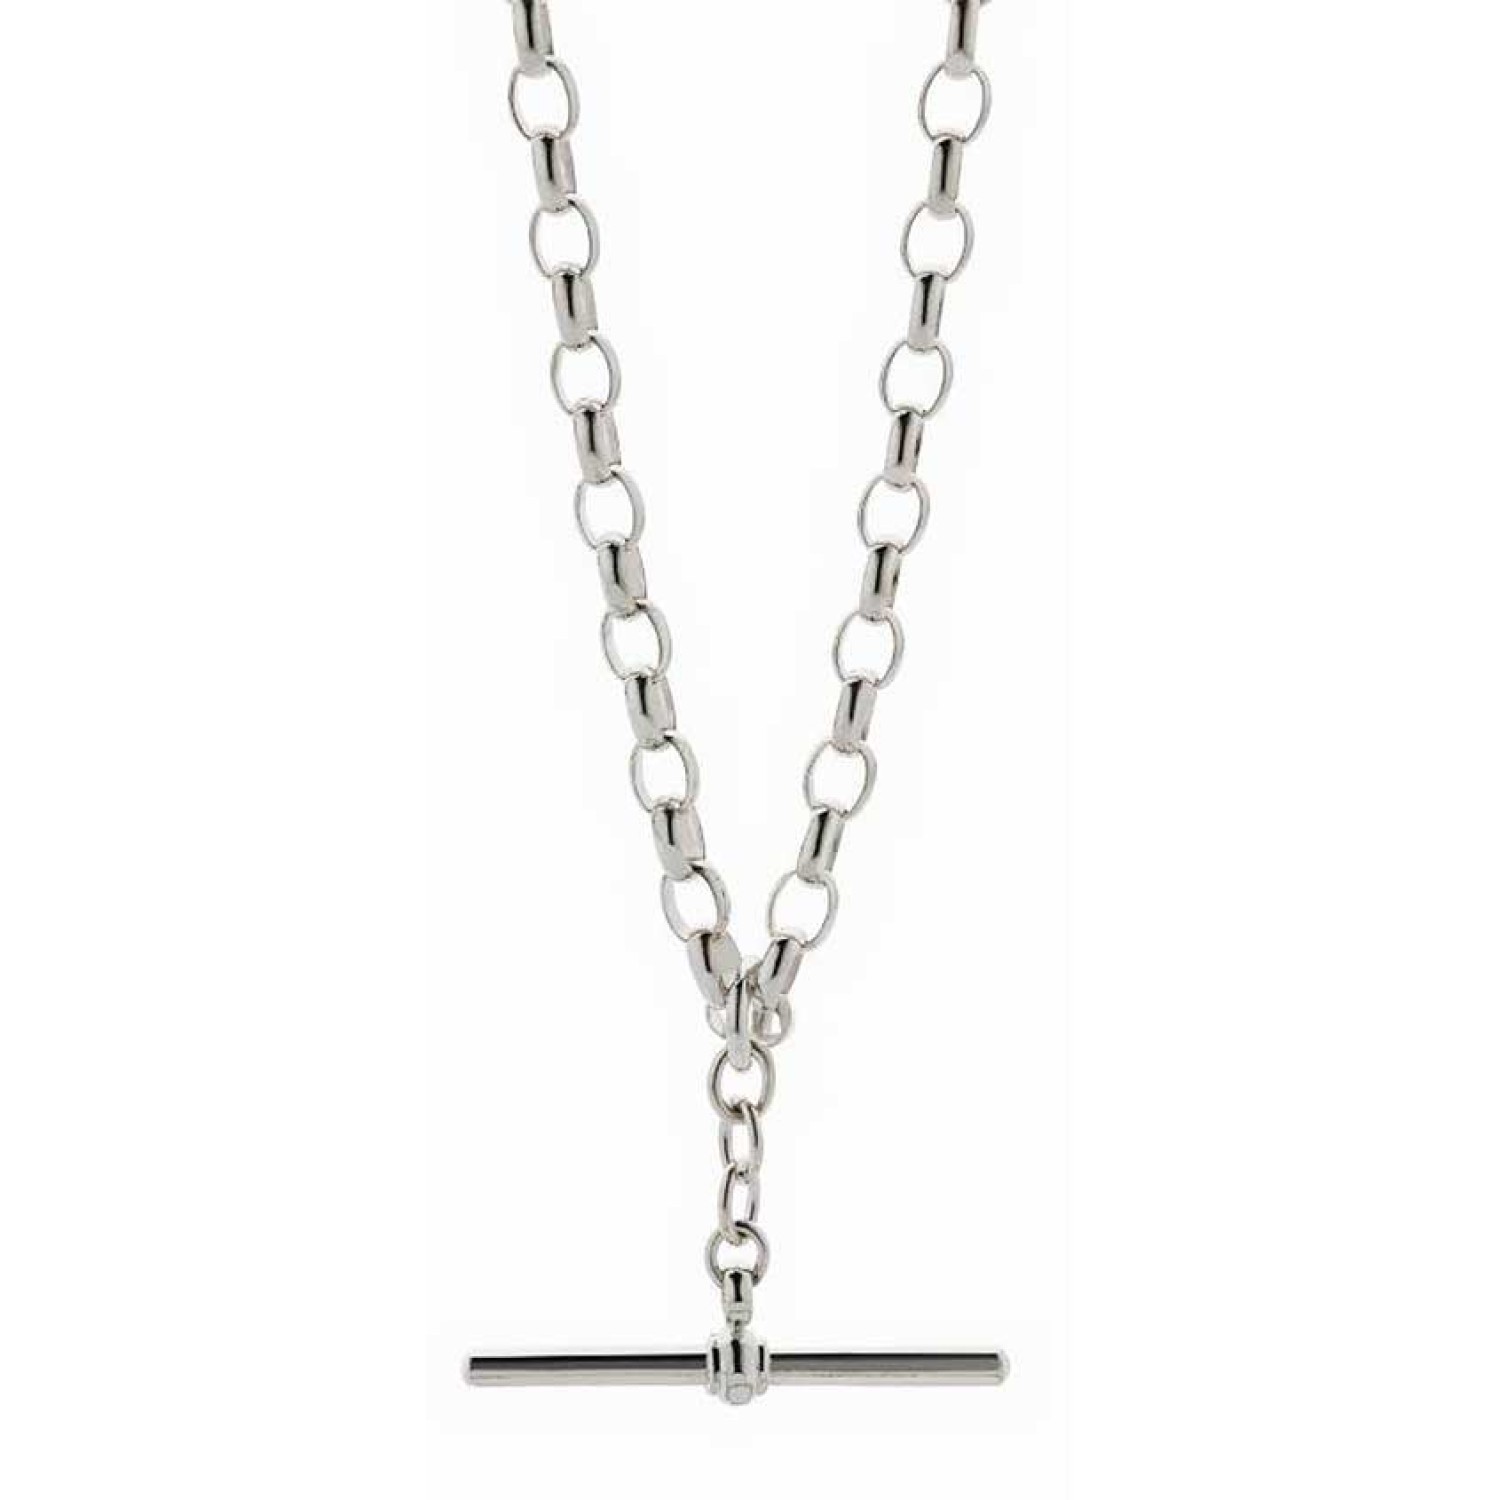 Sterling Silver Belcher Fob Necklace. Crafted in sterling silver Oxipay is simply the easier way to pay - use Oxipay and well spread your payment up to a maximum of $1500 over 4 easy instalments. No interest. Ever!925 Sterling Silver 45cm in length Christ